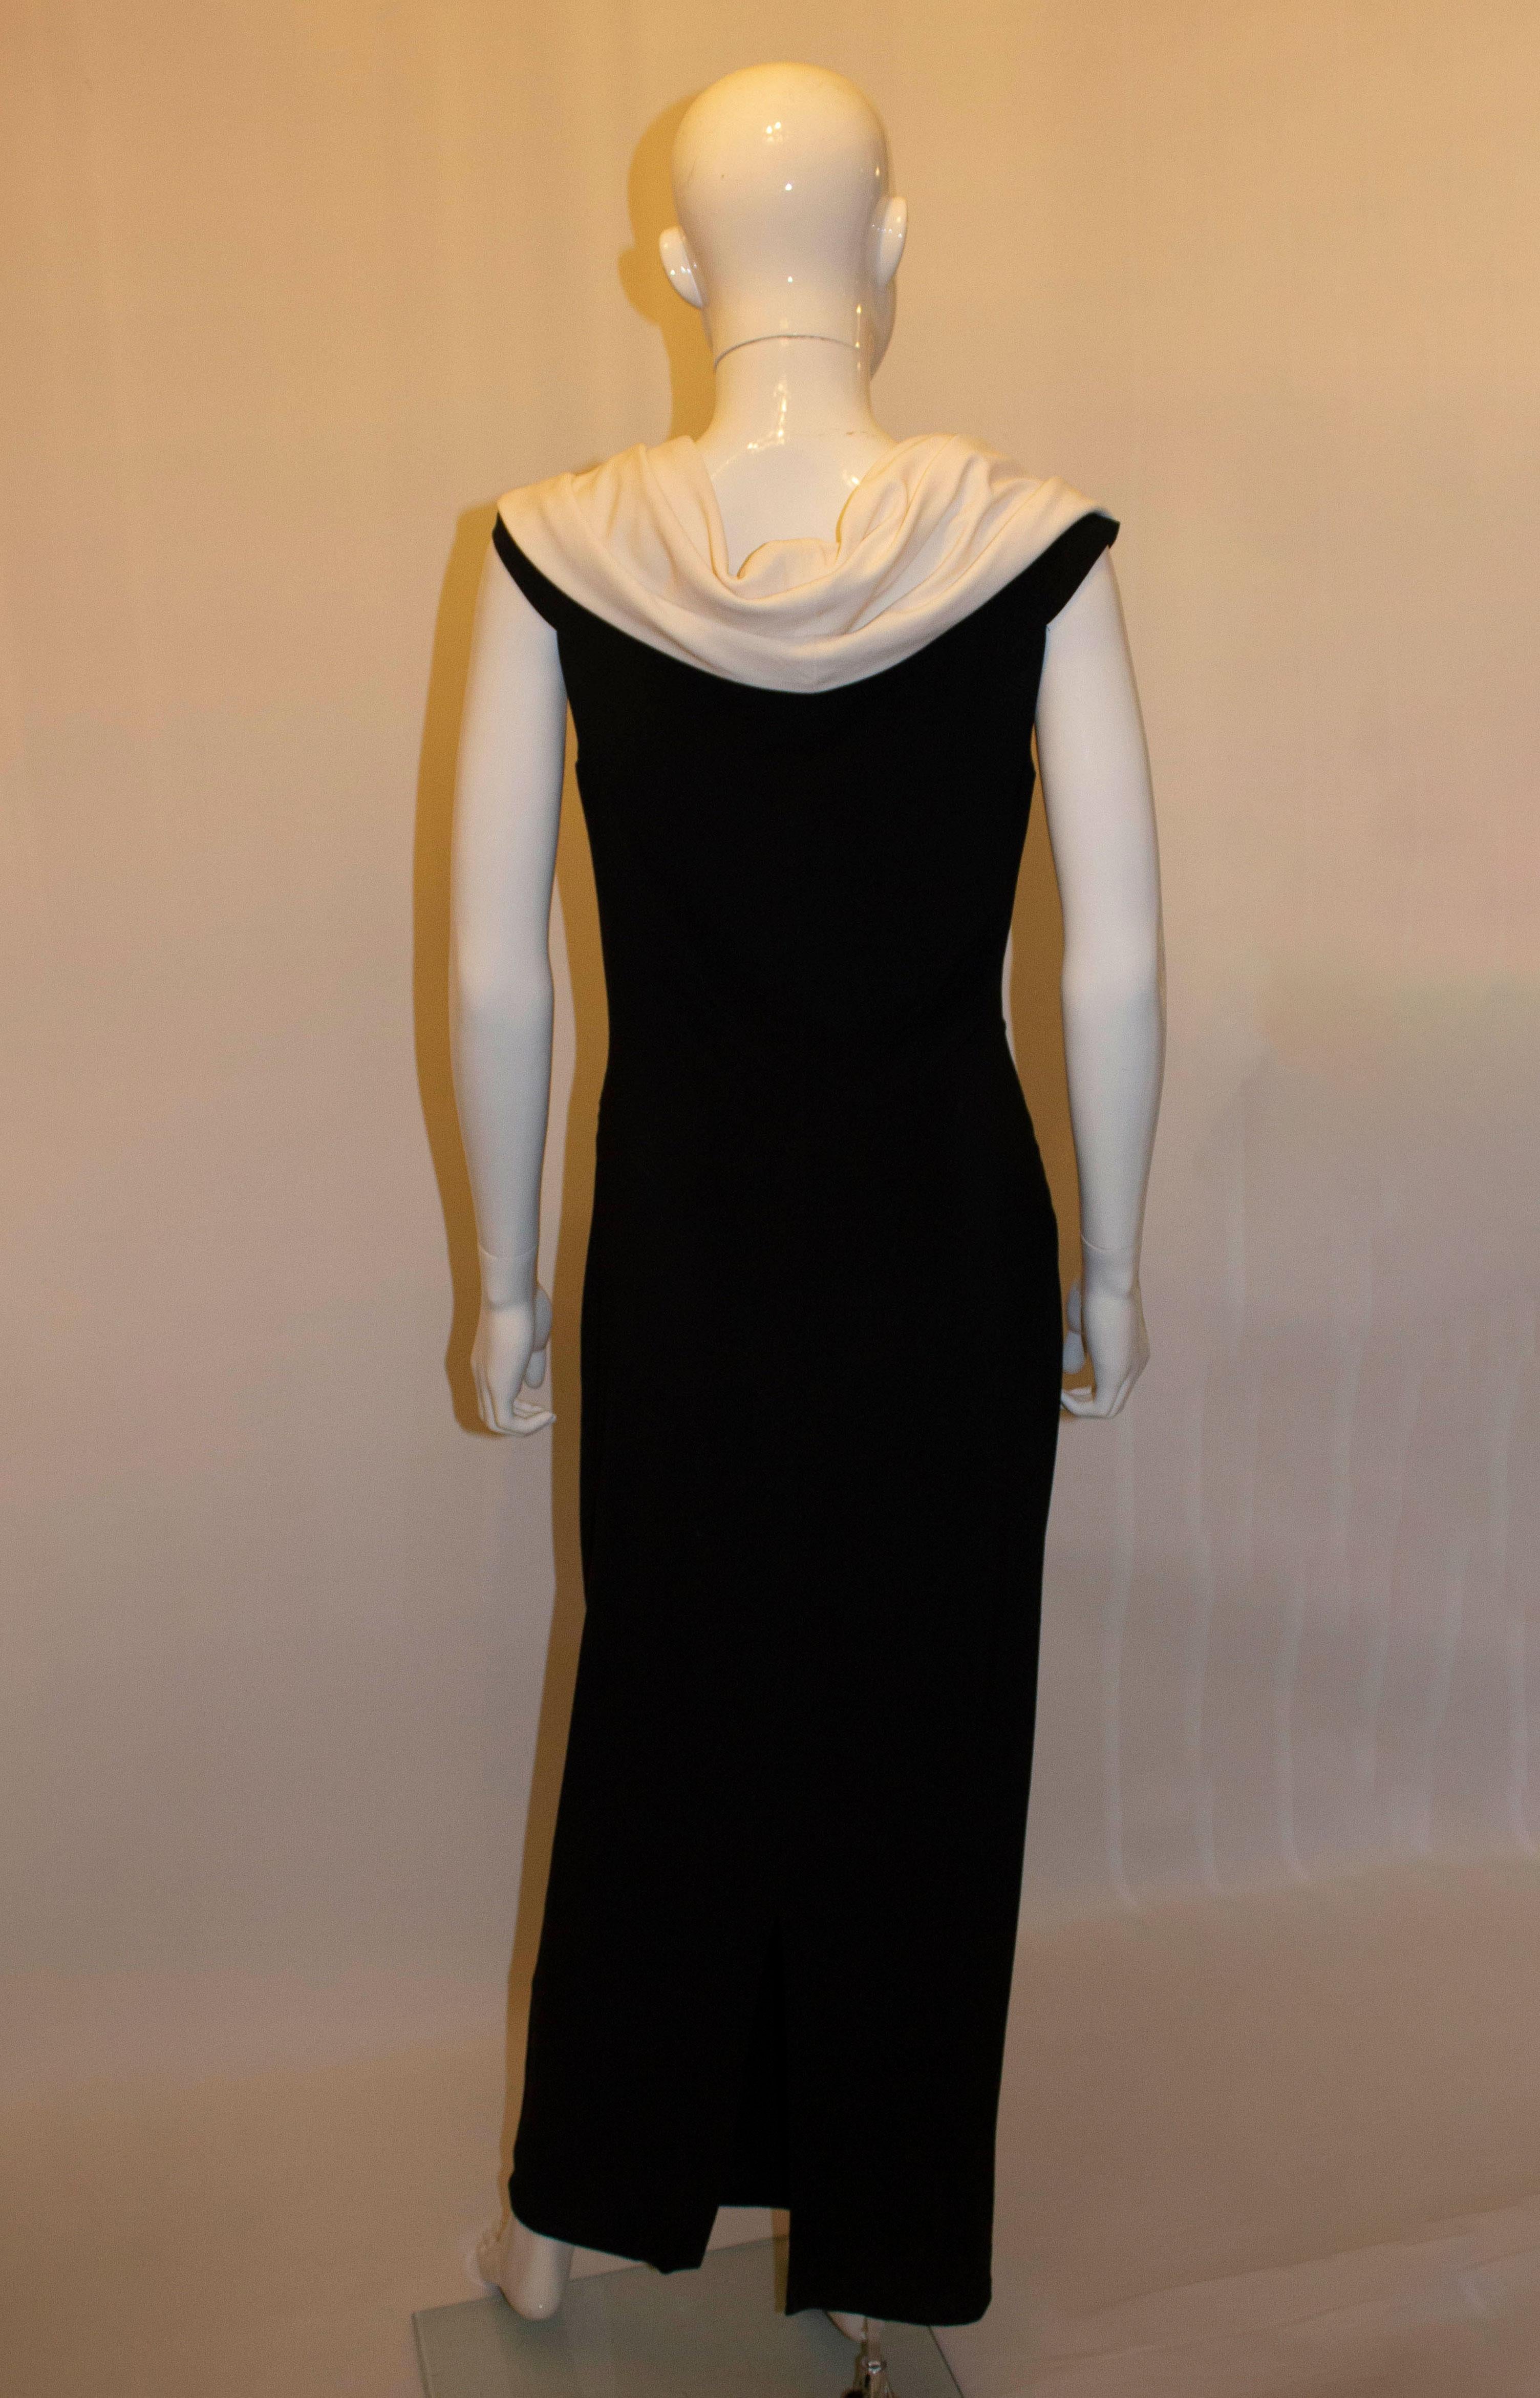  Gina Bacioni Black and White Evening Gown For Sale 3